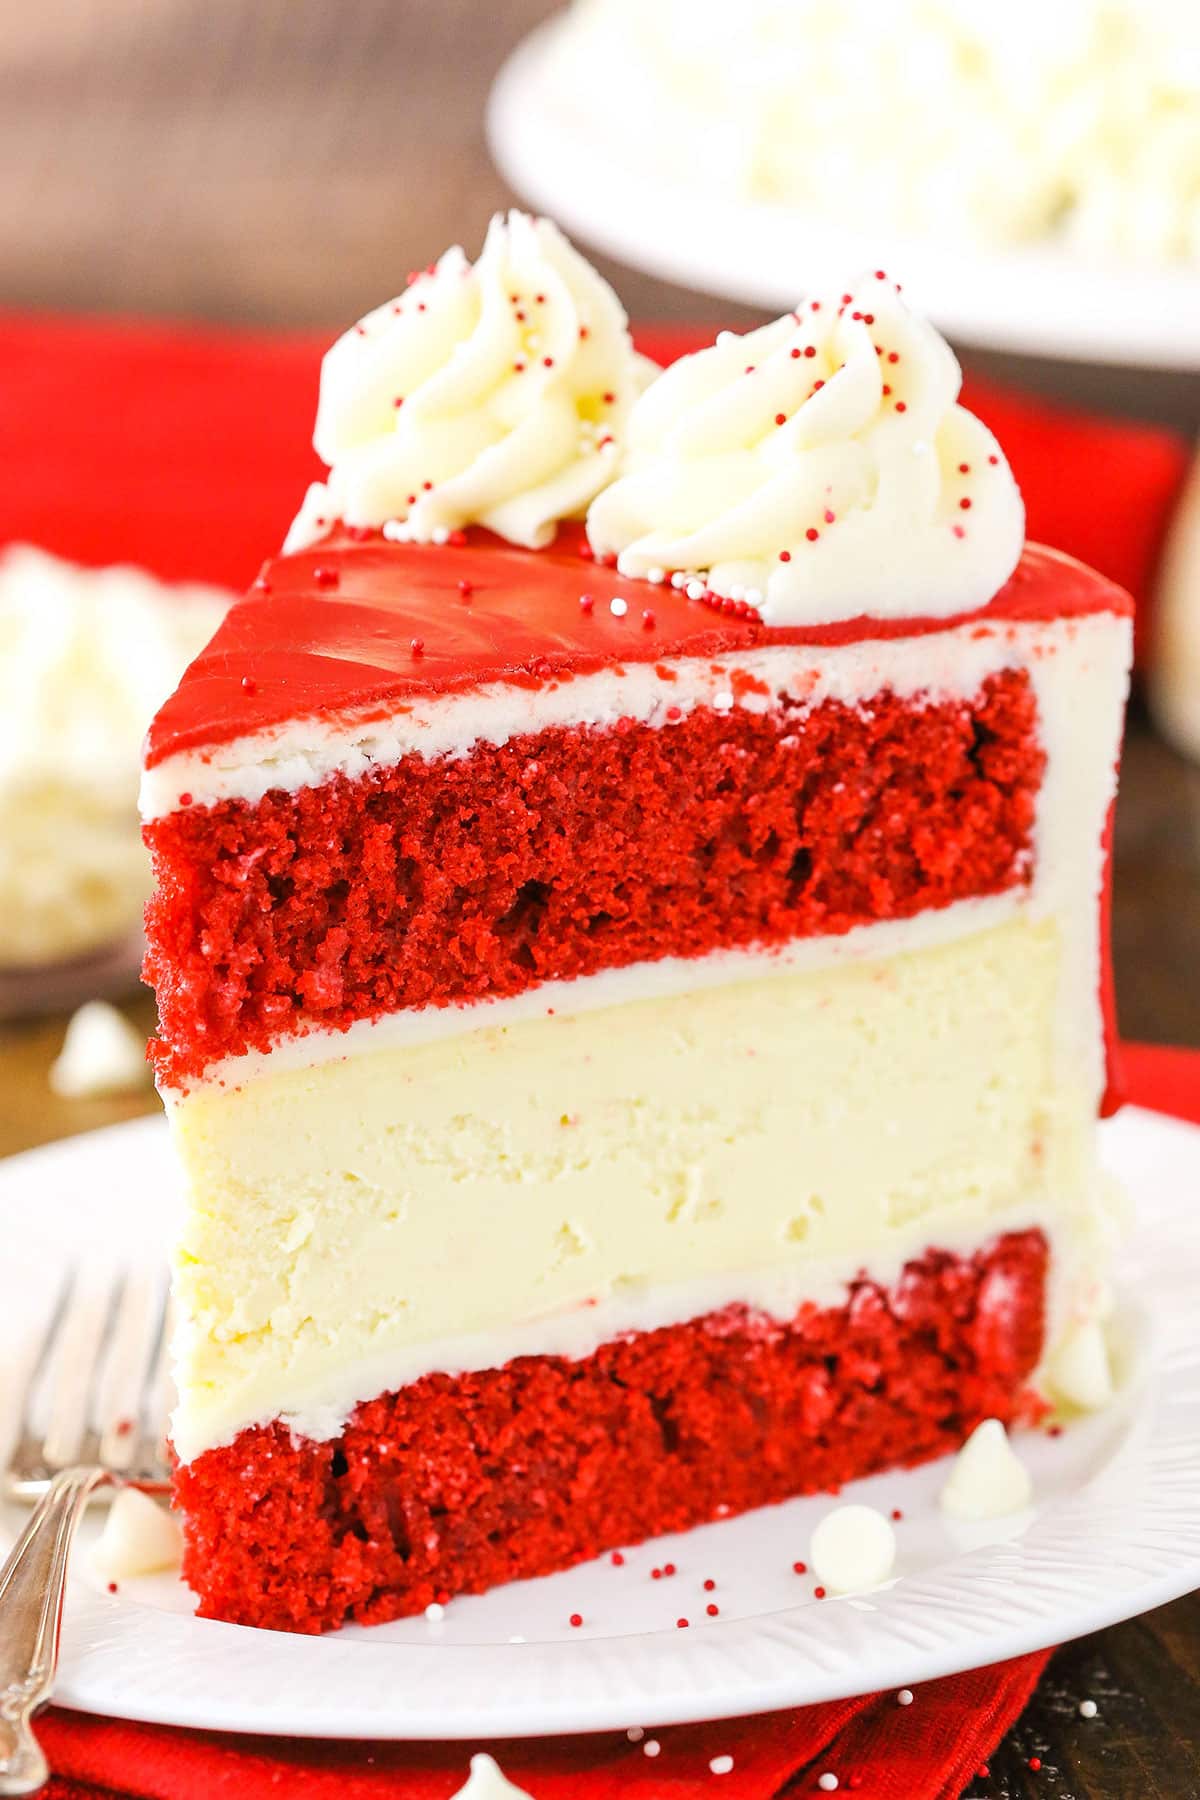 Best Red Velvet Cake Recipe [VIDEO] - Sweet and Savory Meals